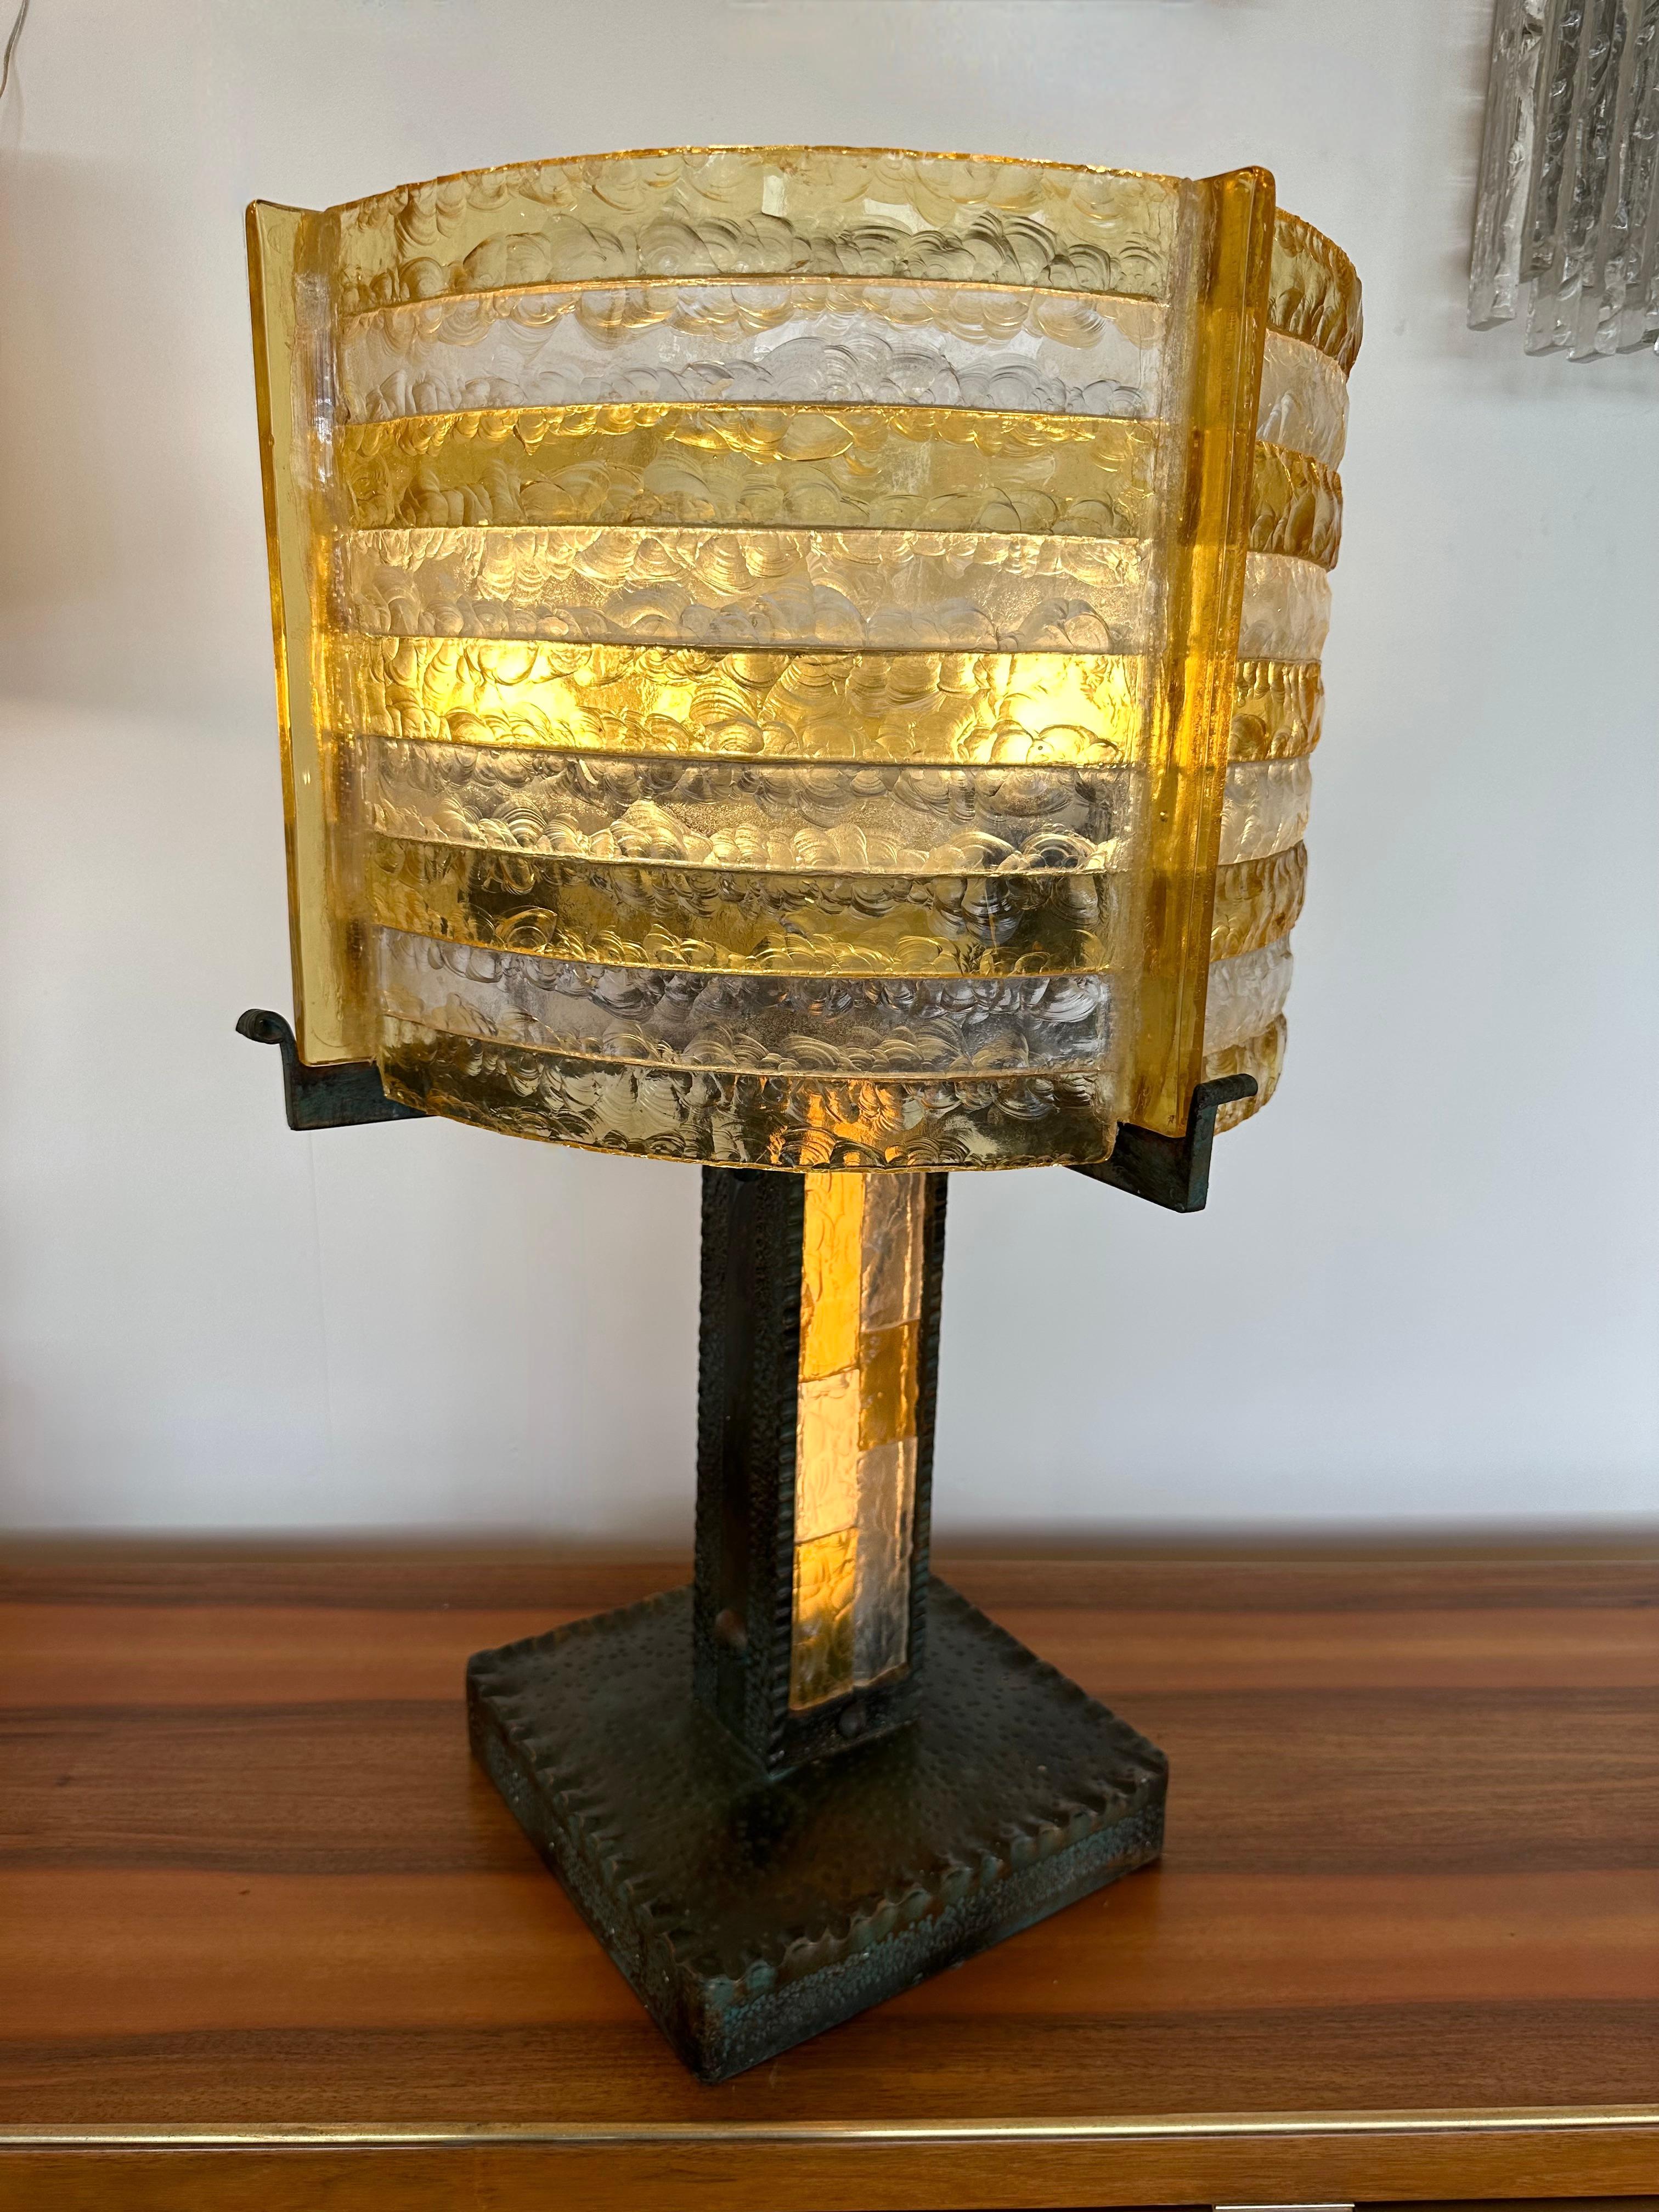 Rare Large Mid-Century Modern lamp hammered glass and wrought iron, antique green gold gilding patina, by the manufacture Longobard in Verona in a Brutalist style, the concurrent of Biancardi Jordan Arte and Poliarte during the 1970s. Nice Lightning